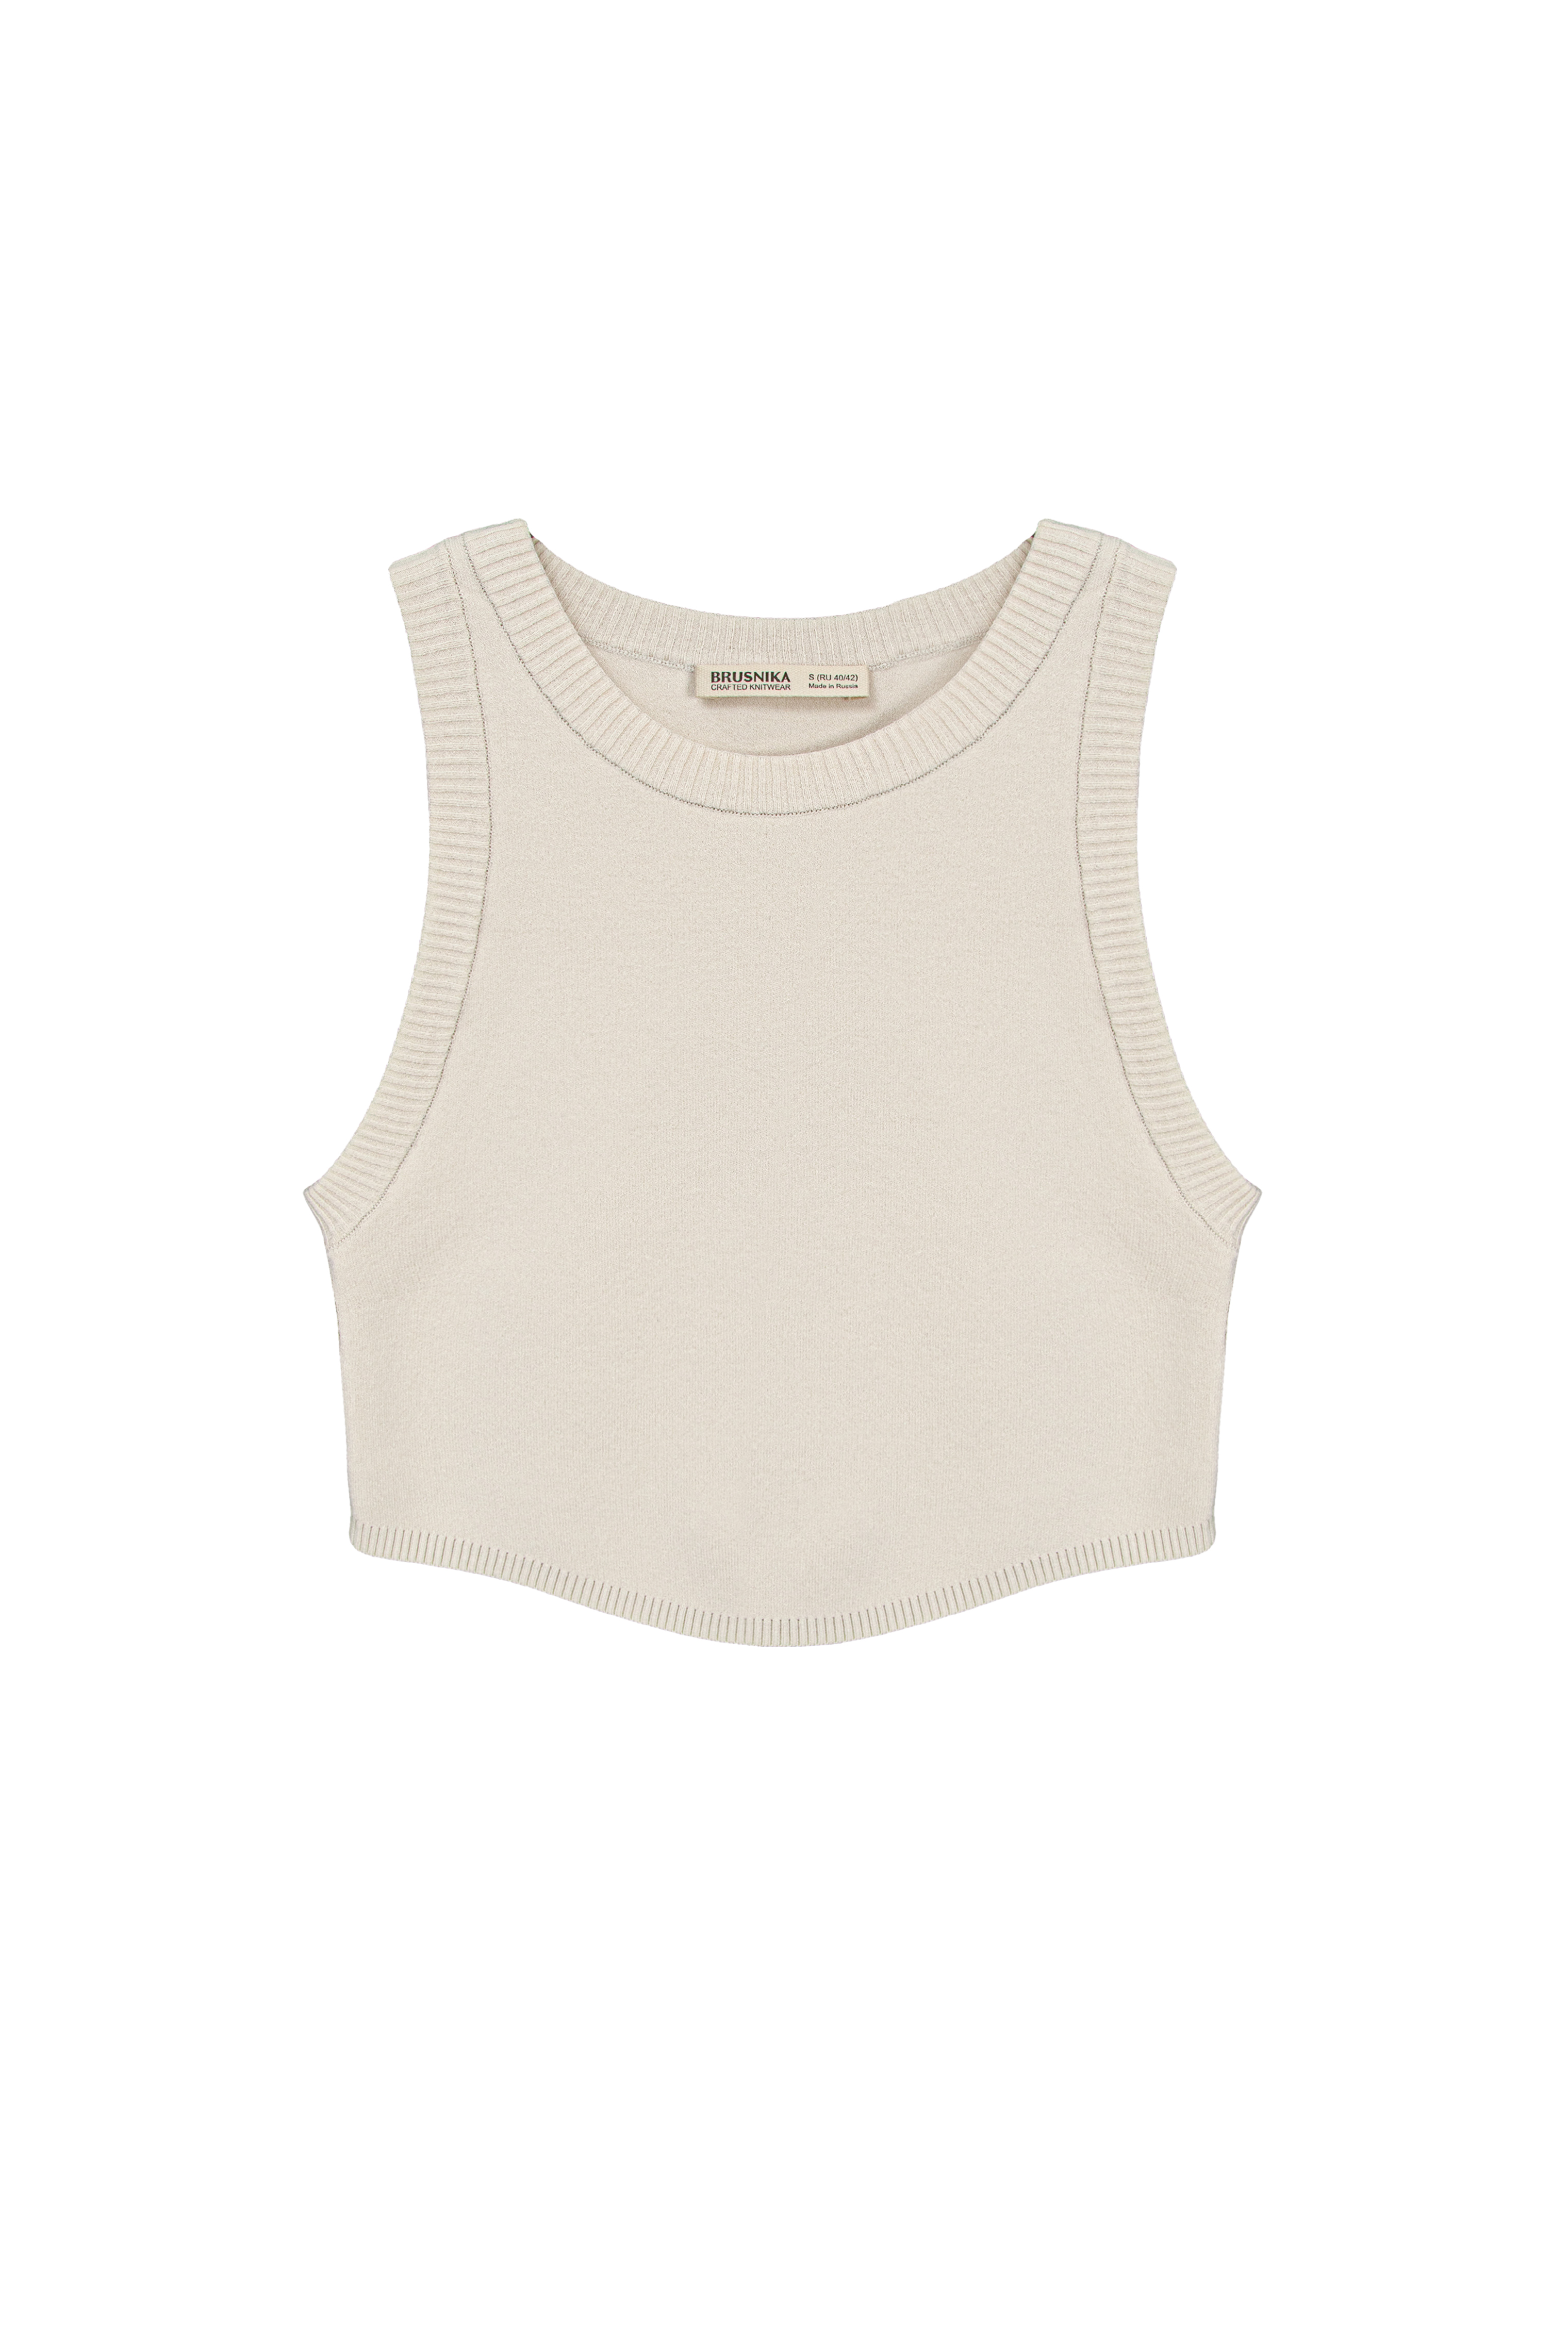 Top 4148-45 Beige from BRUSNiKA